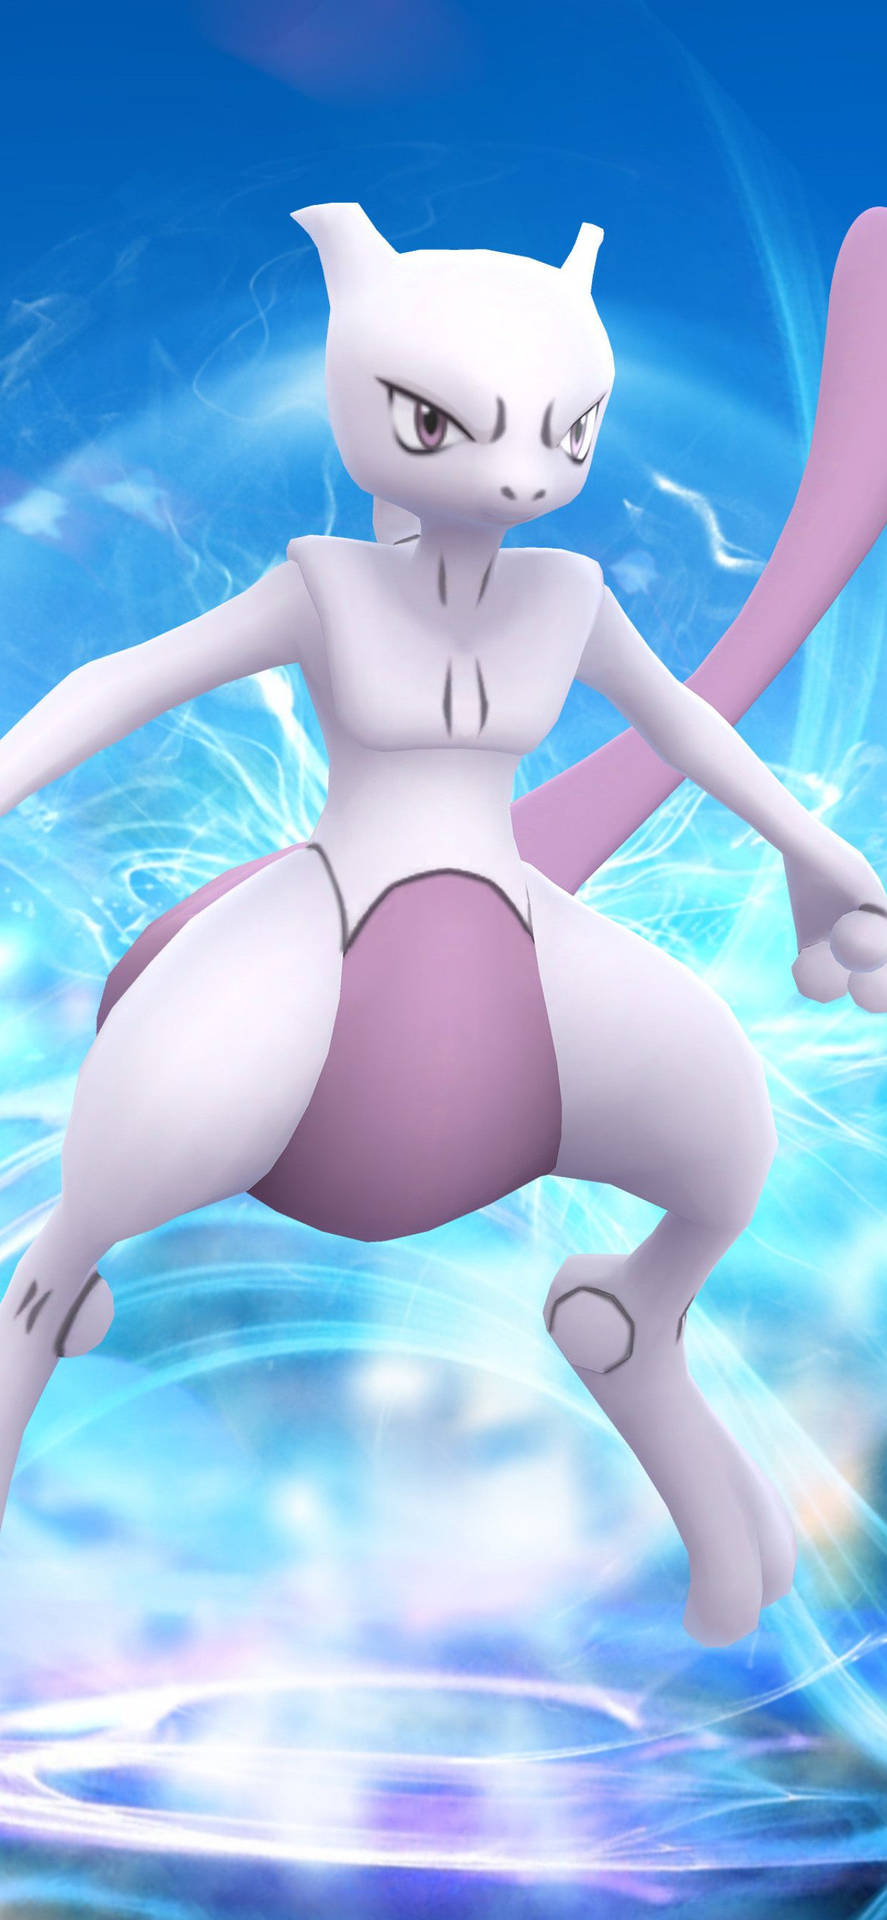 Mewtwo In Game Phone Wallpaper